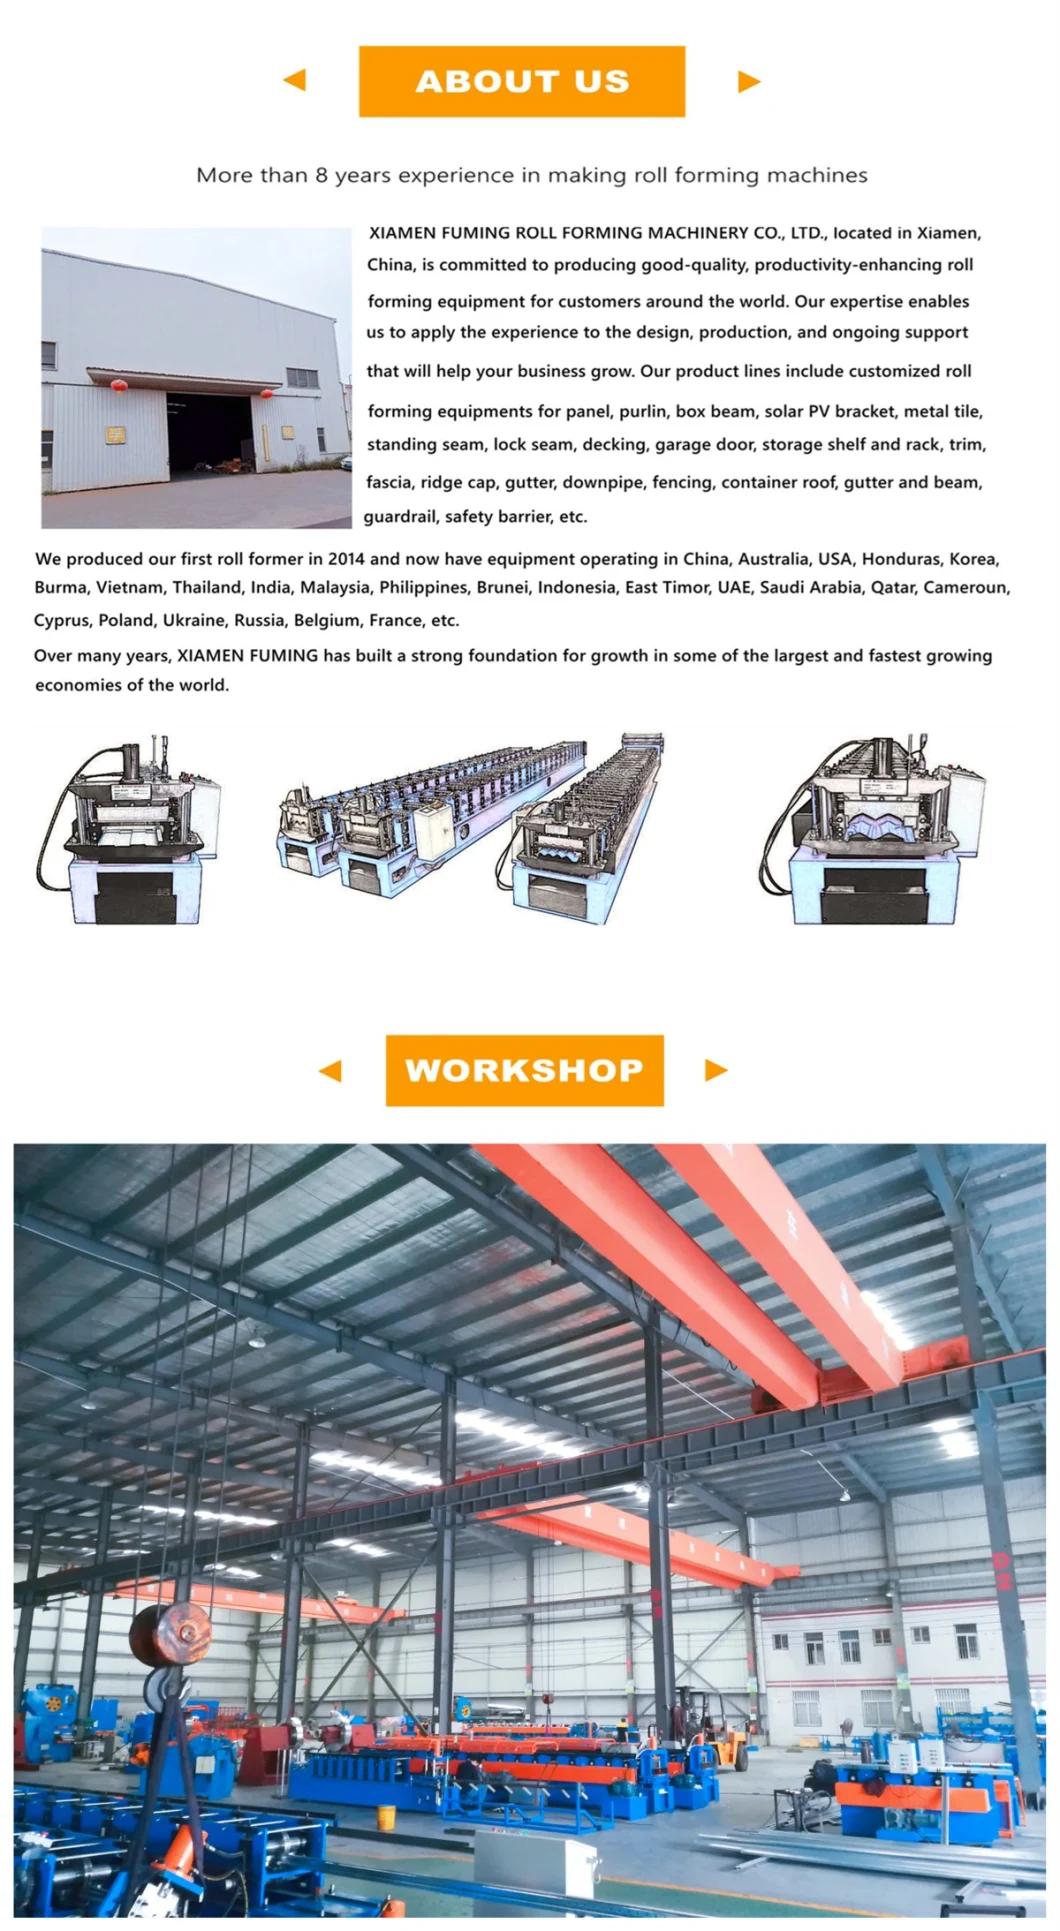 Downpipe, Downspout, Gear/Sprocket, Gear Box or Toroidal Worm Roller Forming Machine Rainspout